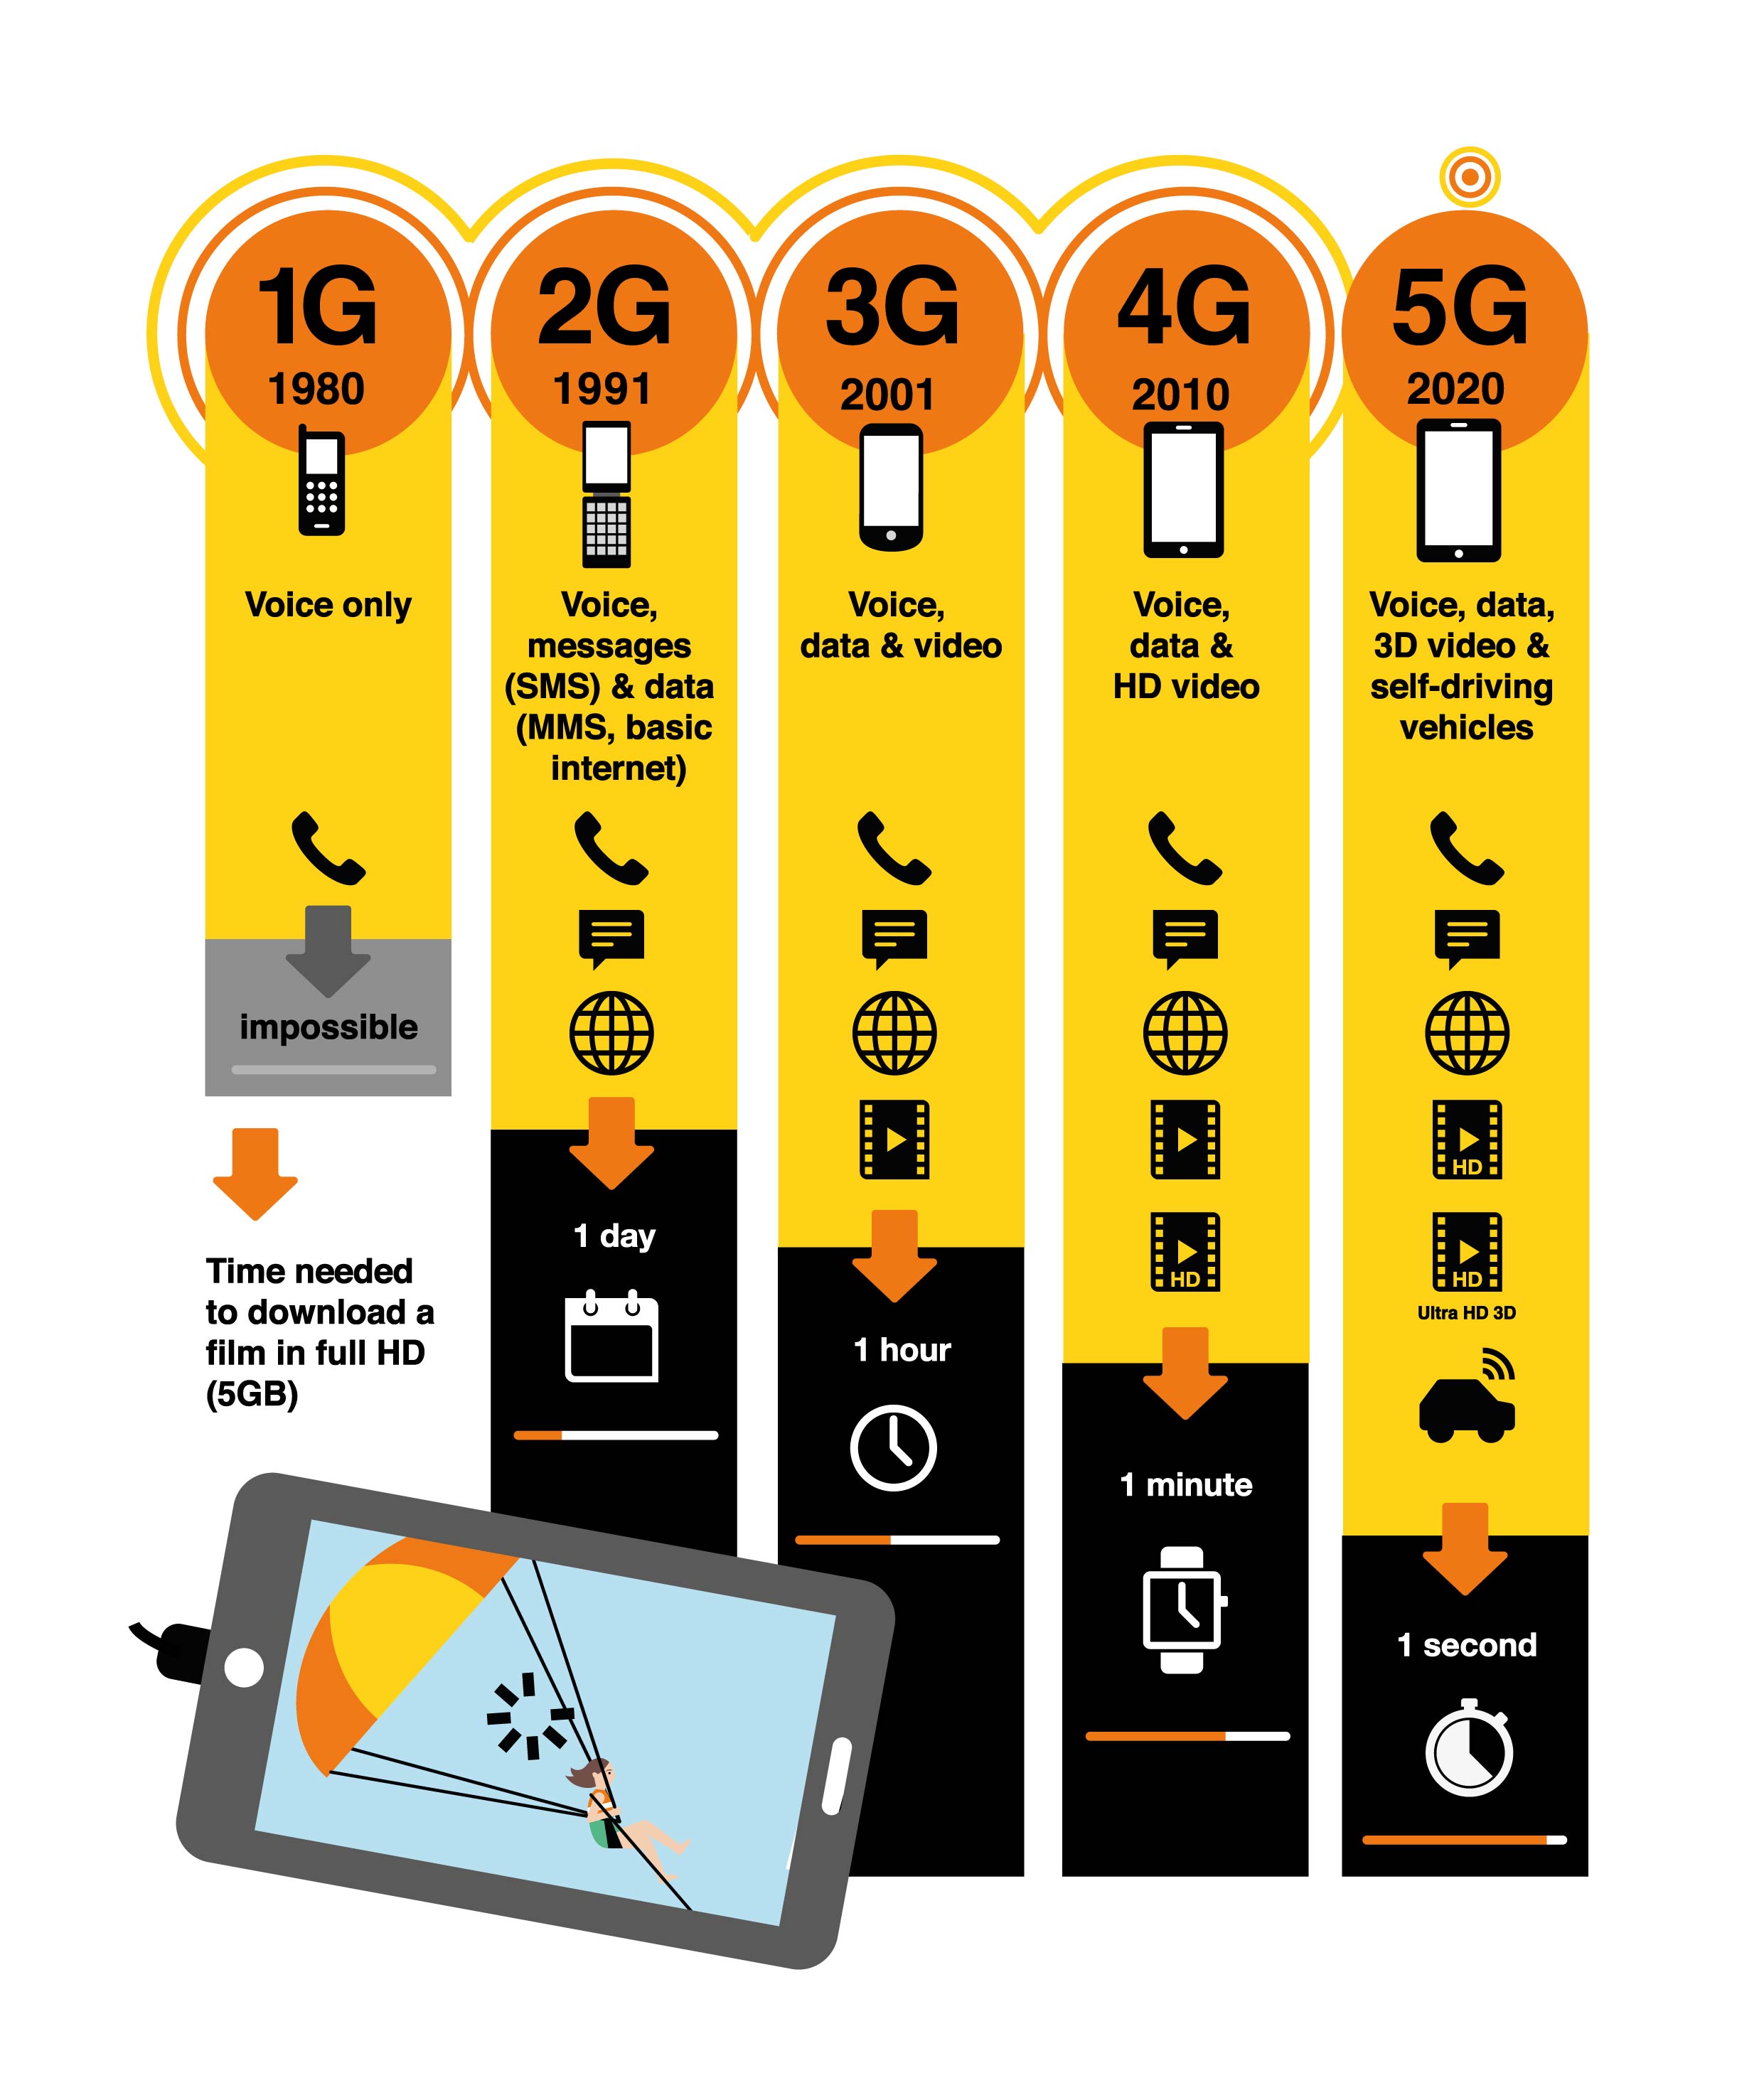 5G: much more powerful than 4G